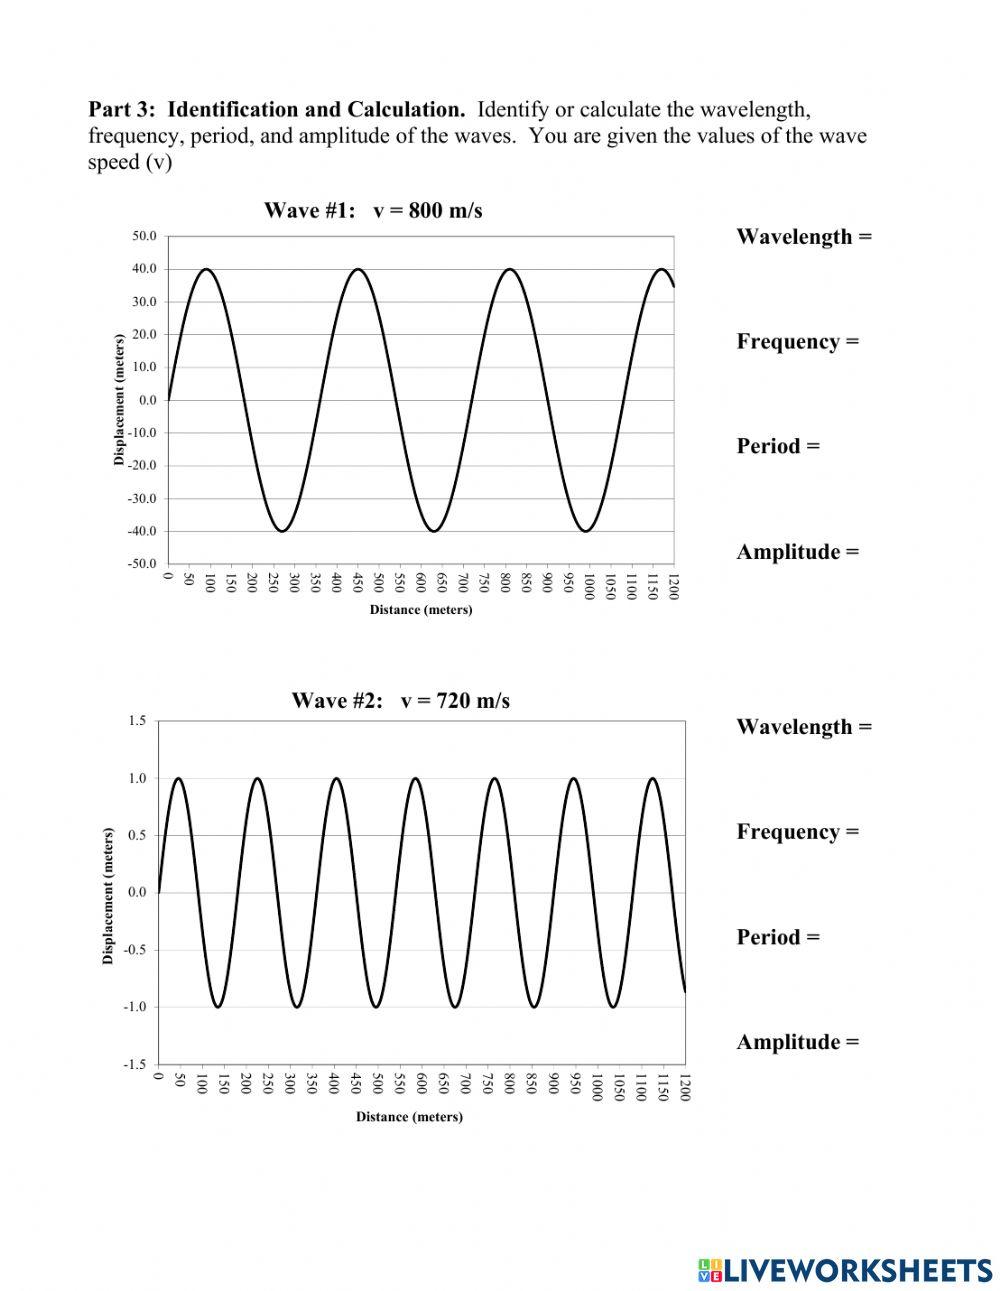 Calculating Parameters of Waves